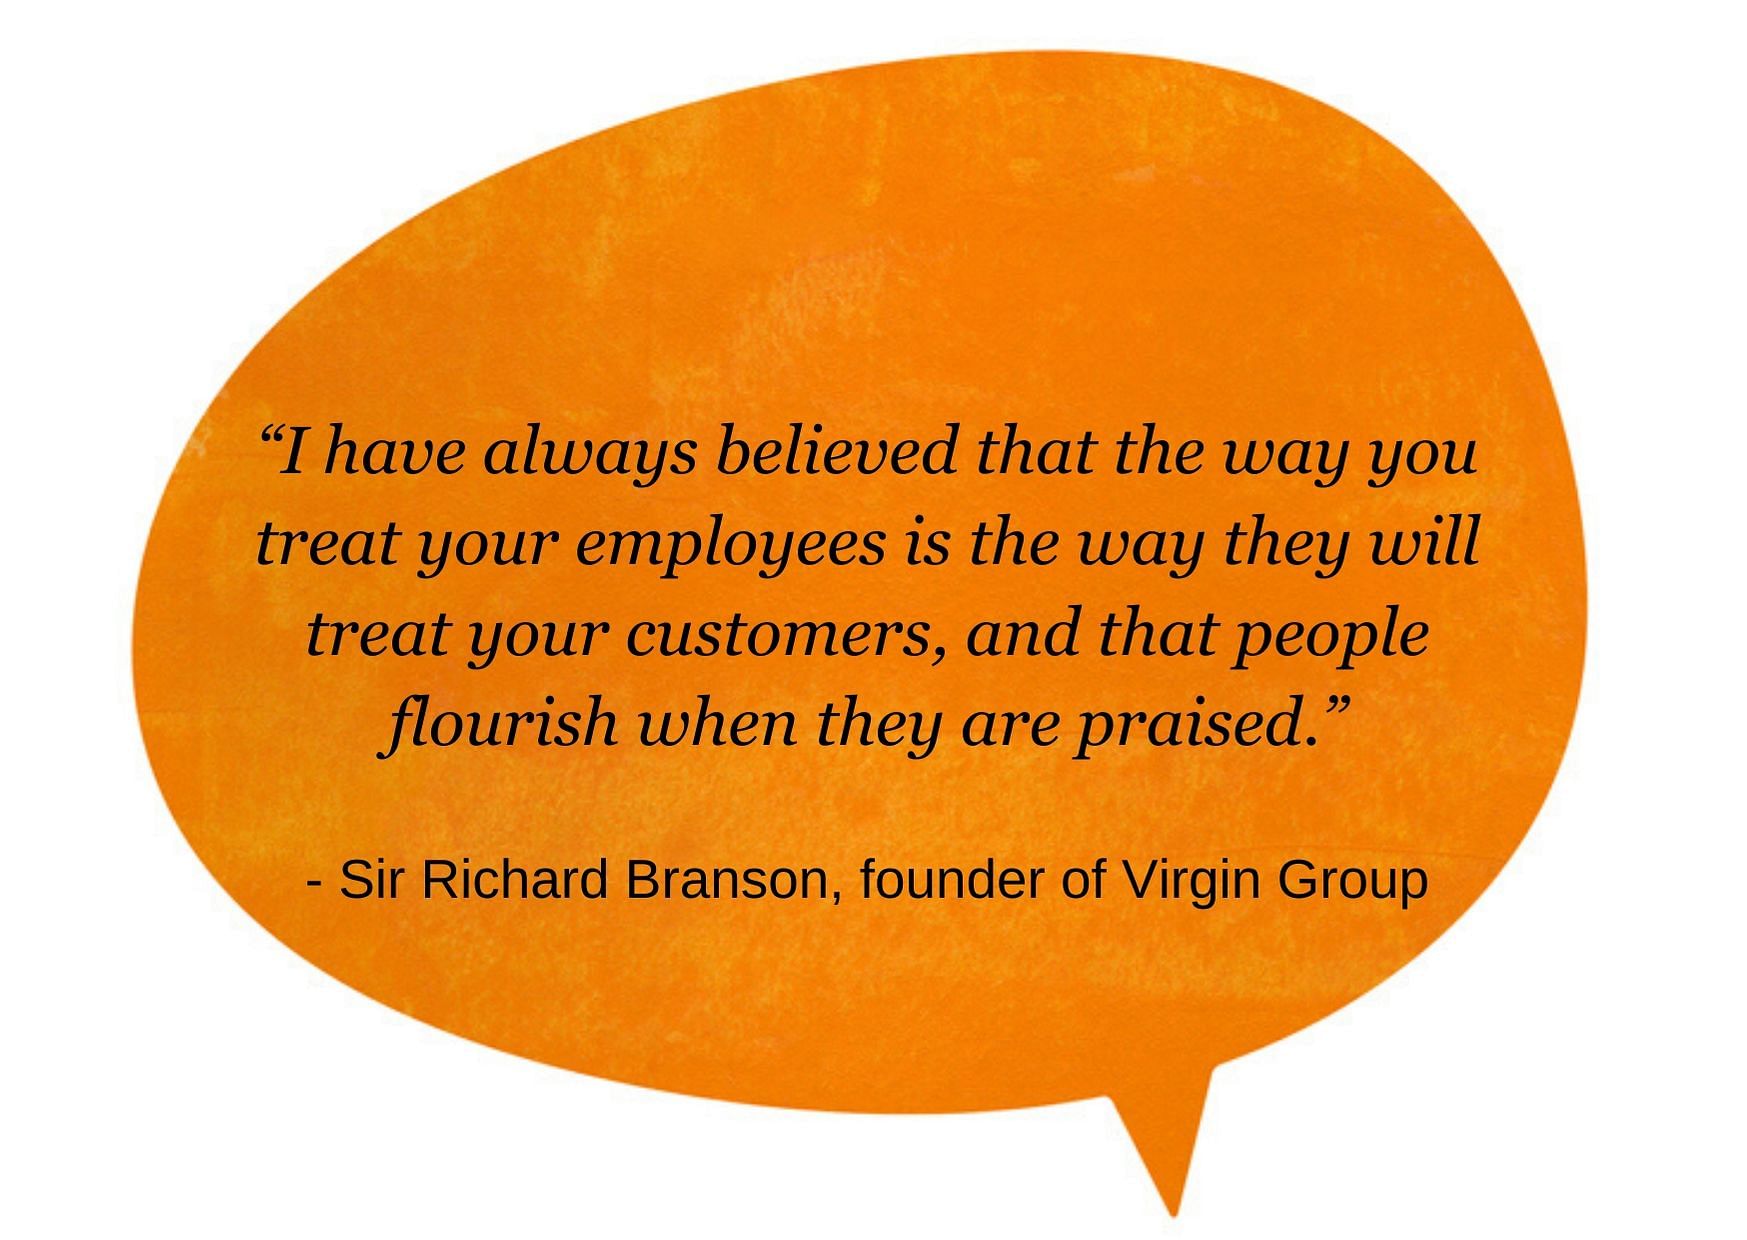 Employee Appreciation Day 2020 Quotes By Businessmen and Authors like